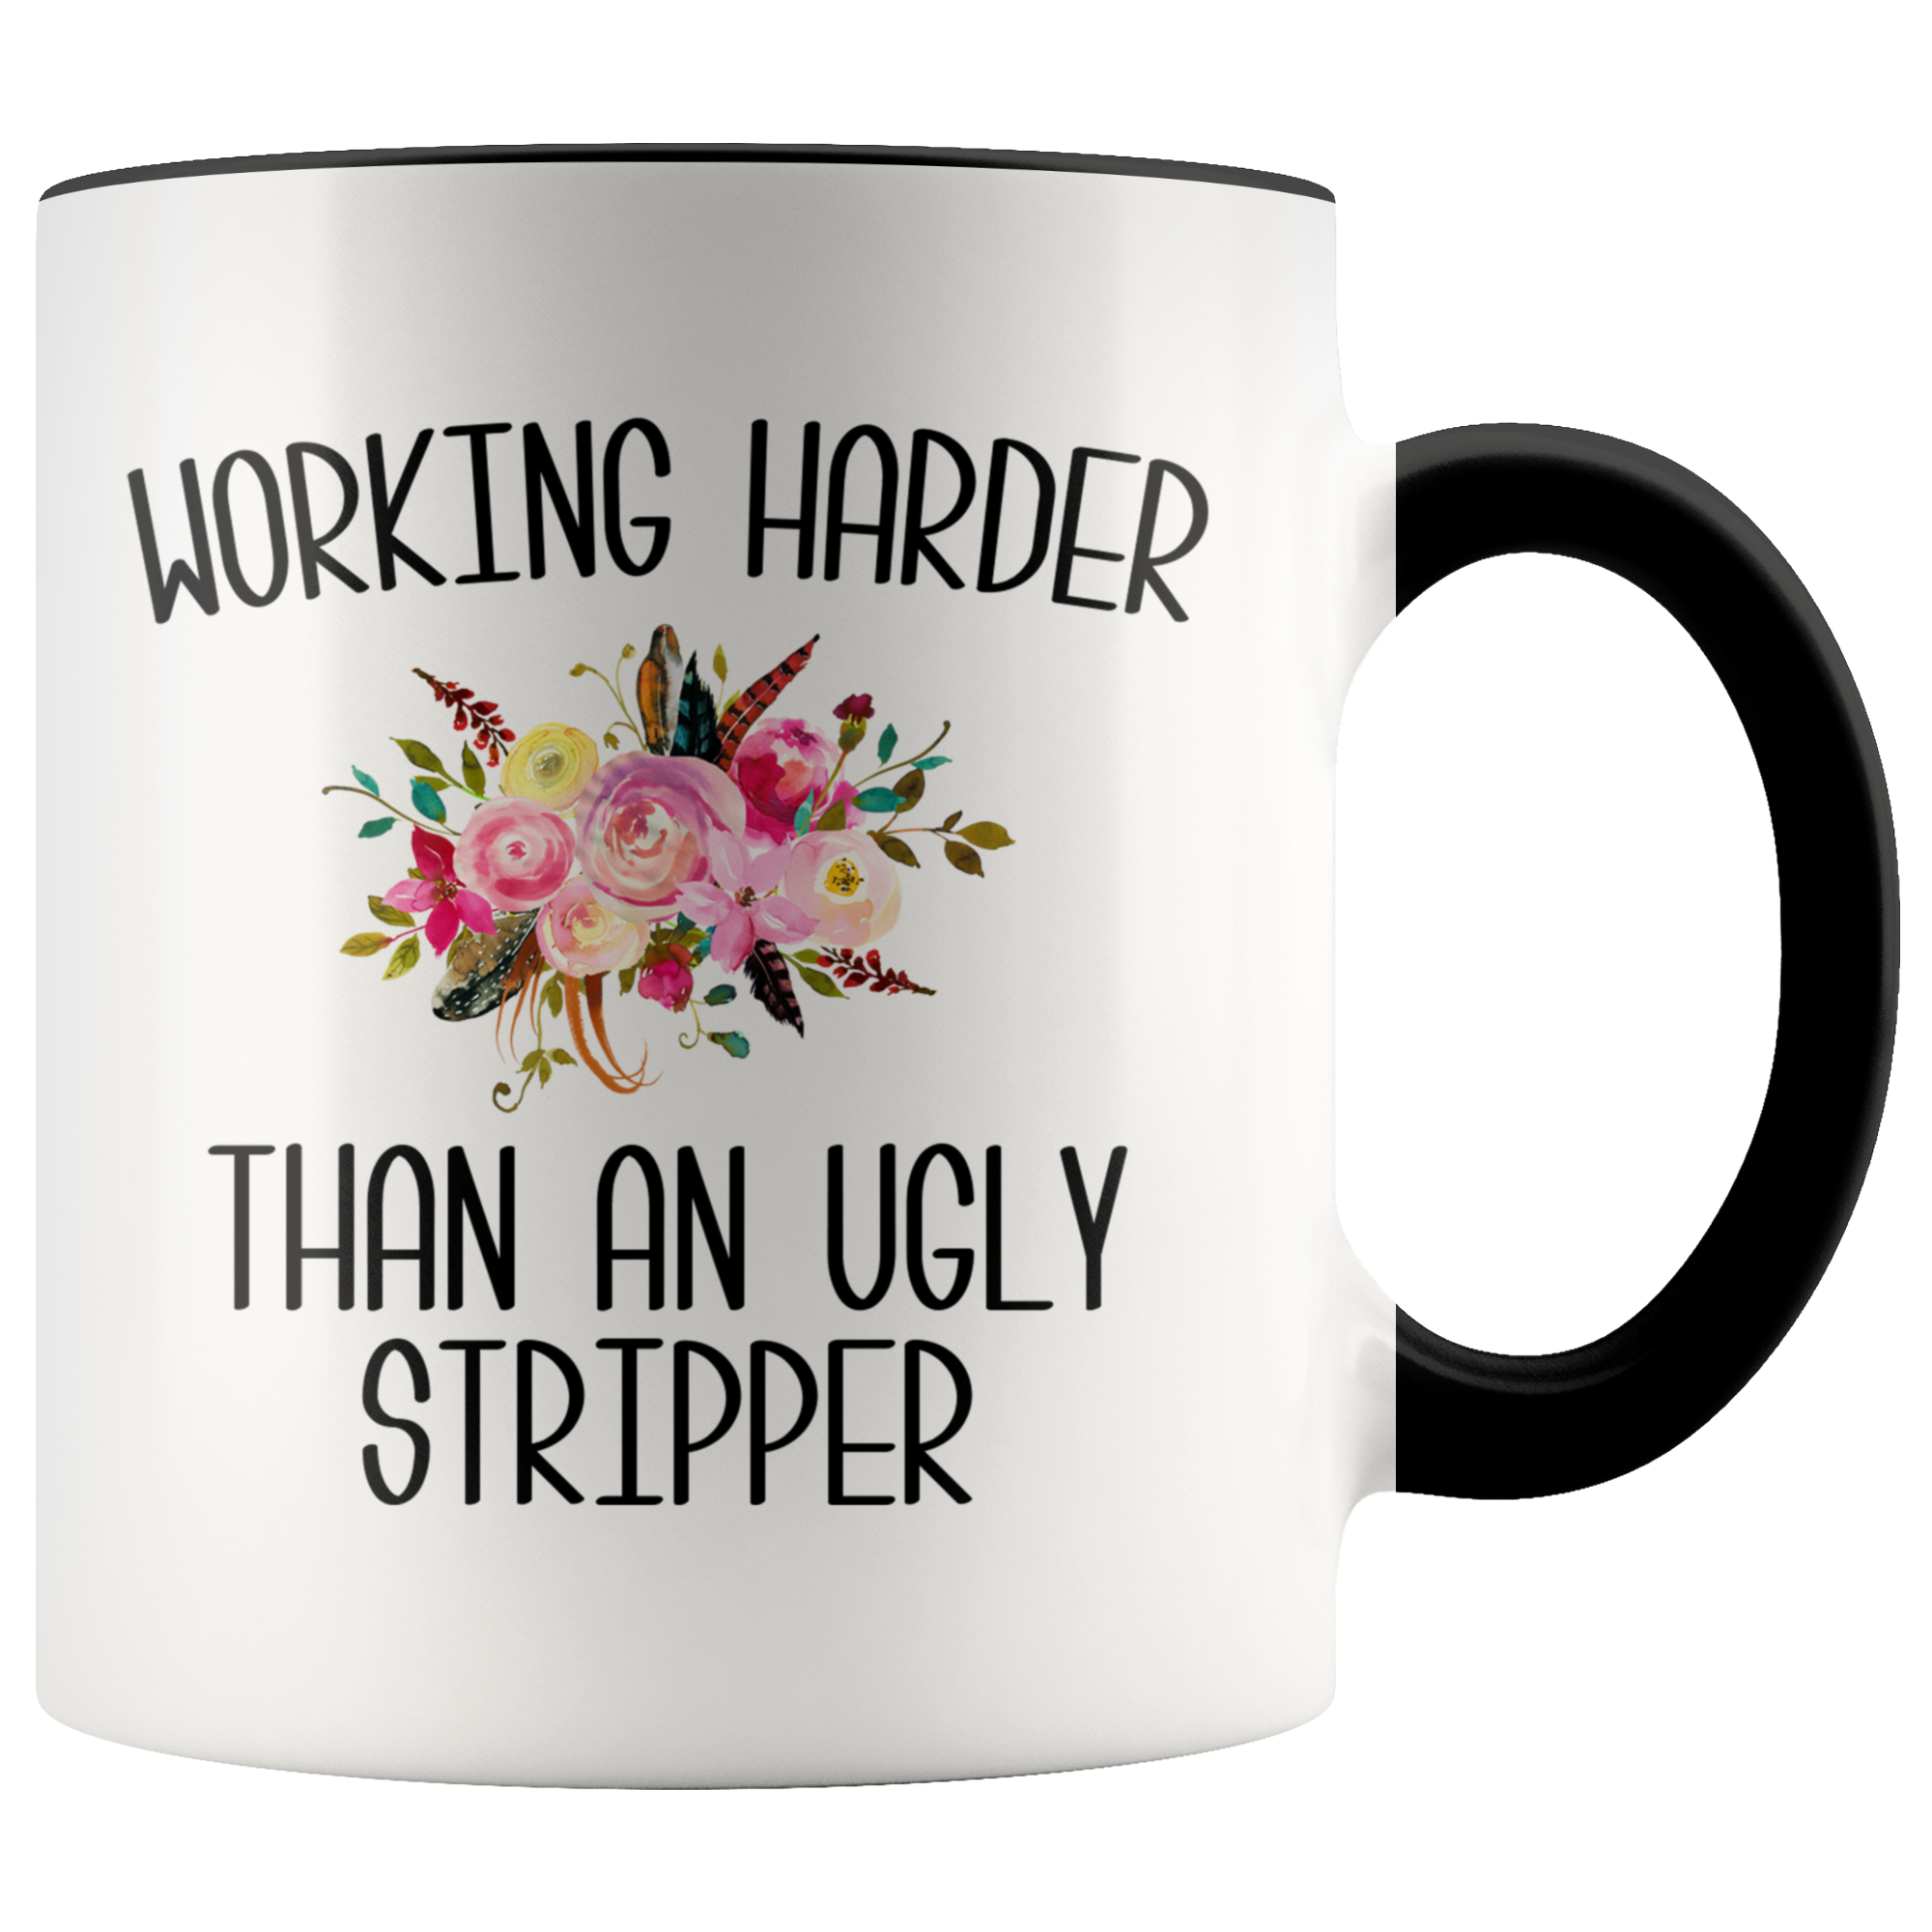 Working Harder Than an Ugly Stripper Coffee Mug Funny Work Cup Inappropriate Coworker Gift for the Office